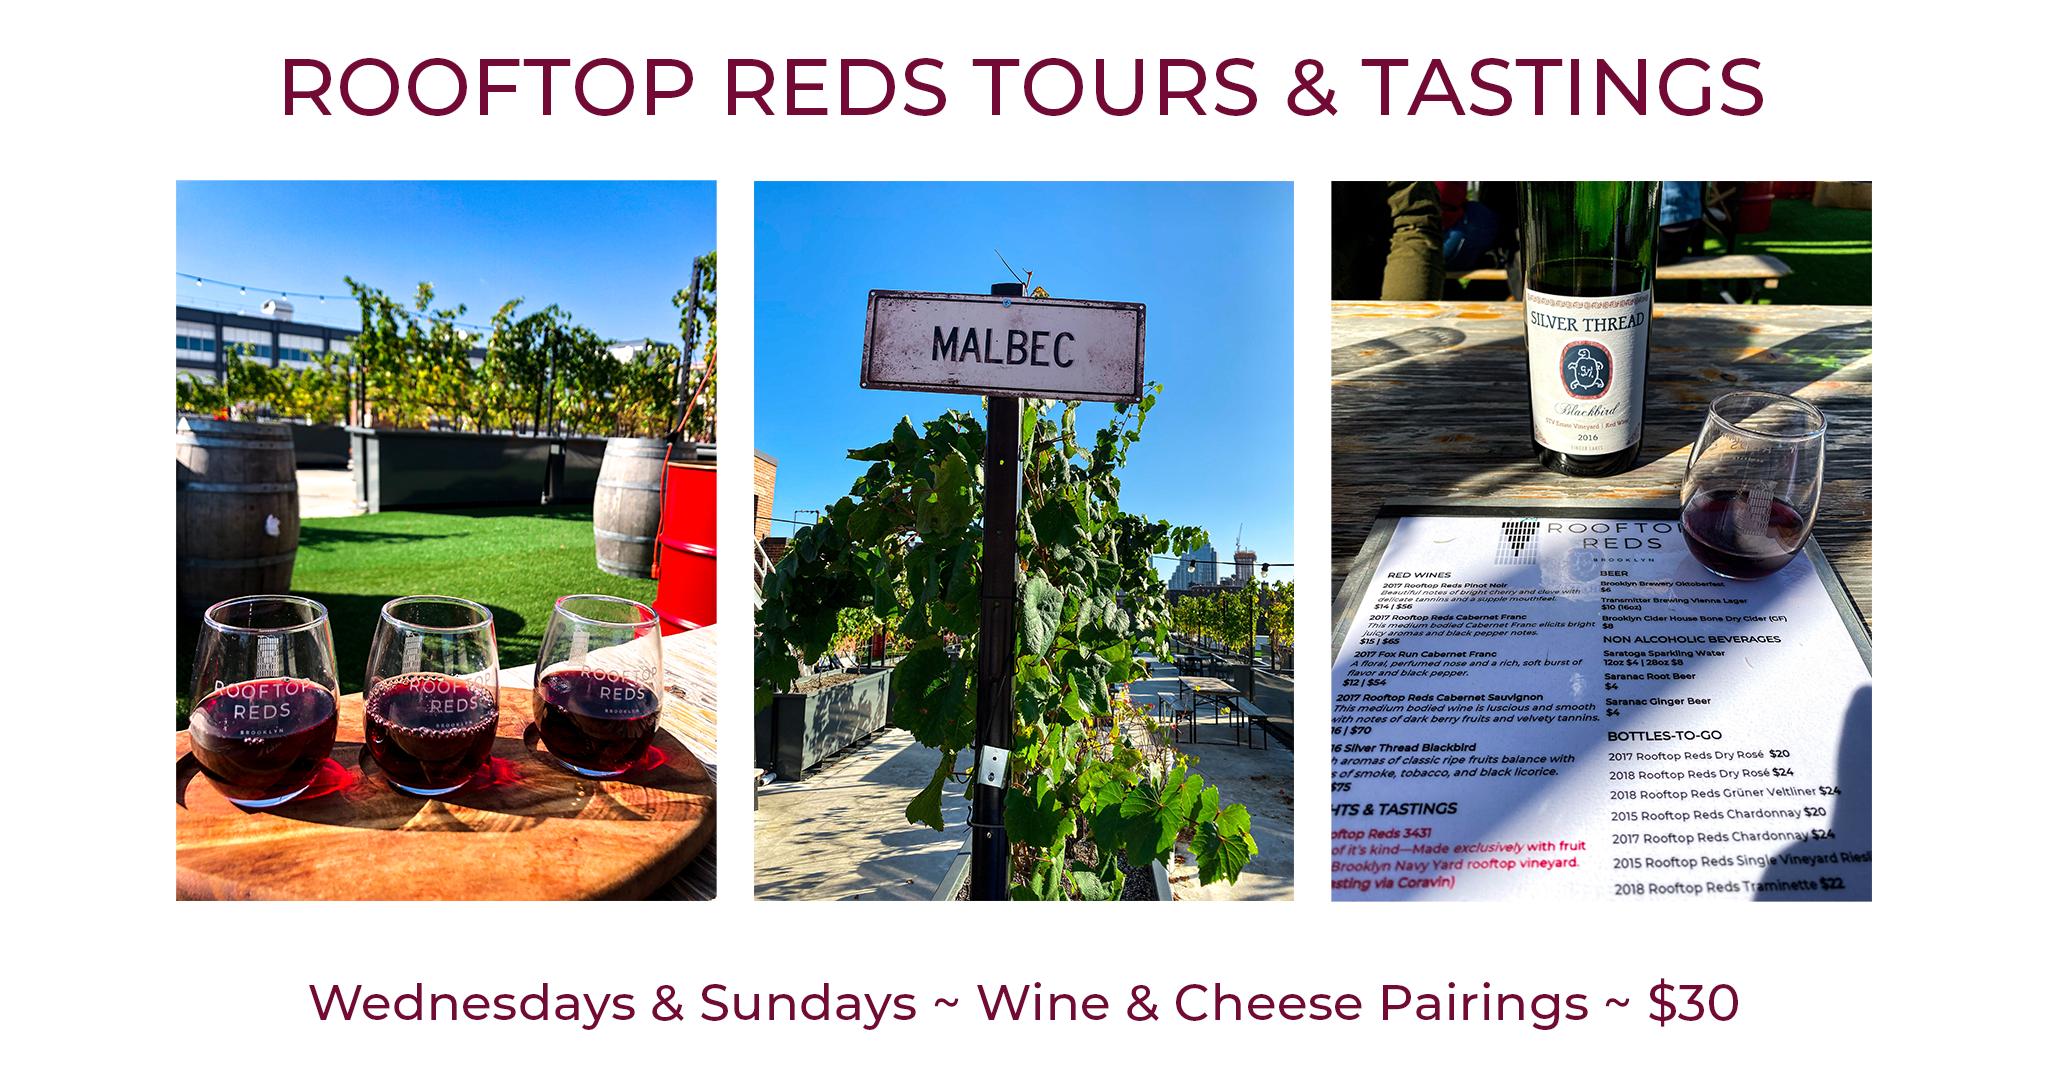 Rooftop Reds Tours & Tastings